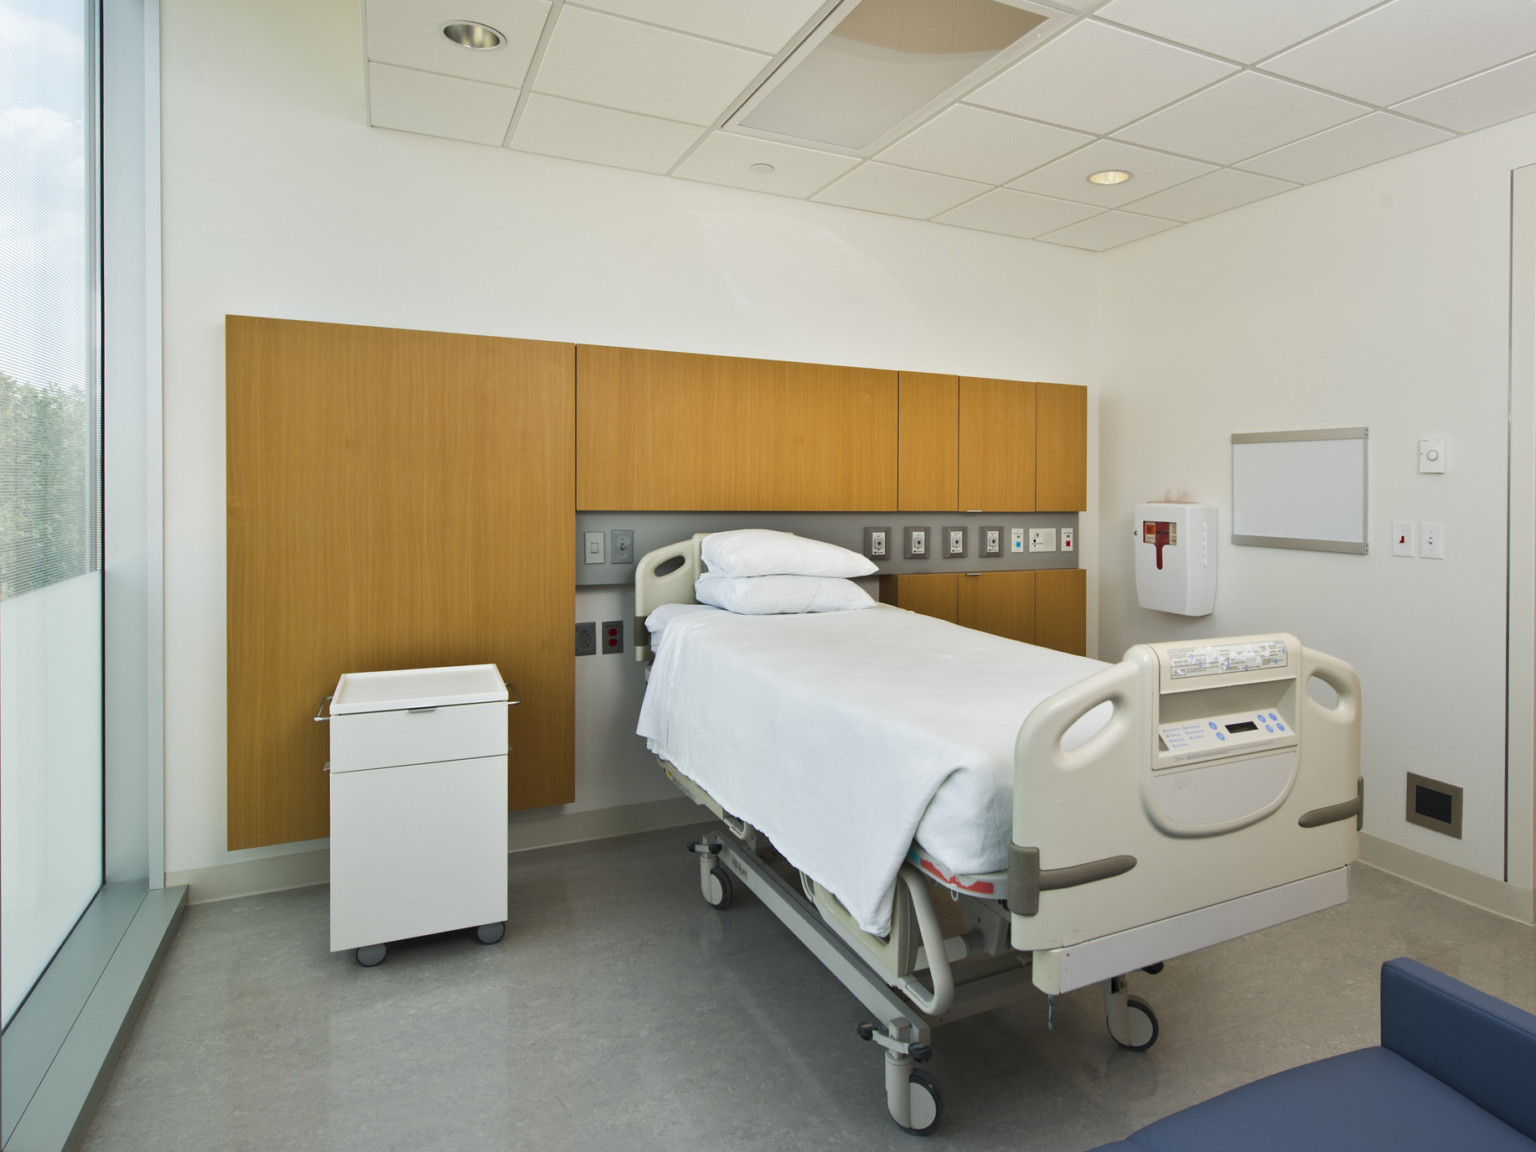 Hospital bed in the center of a white room with wood accent behind. There is grey tile flooring, and floor to ceiling window